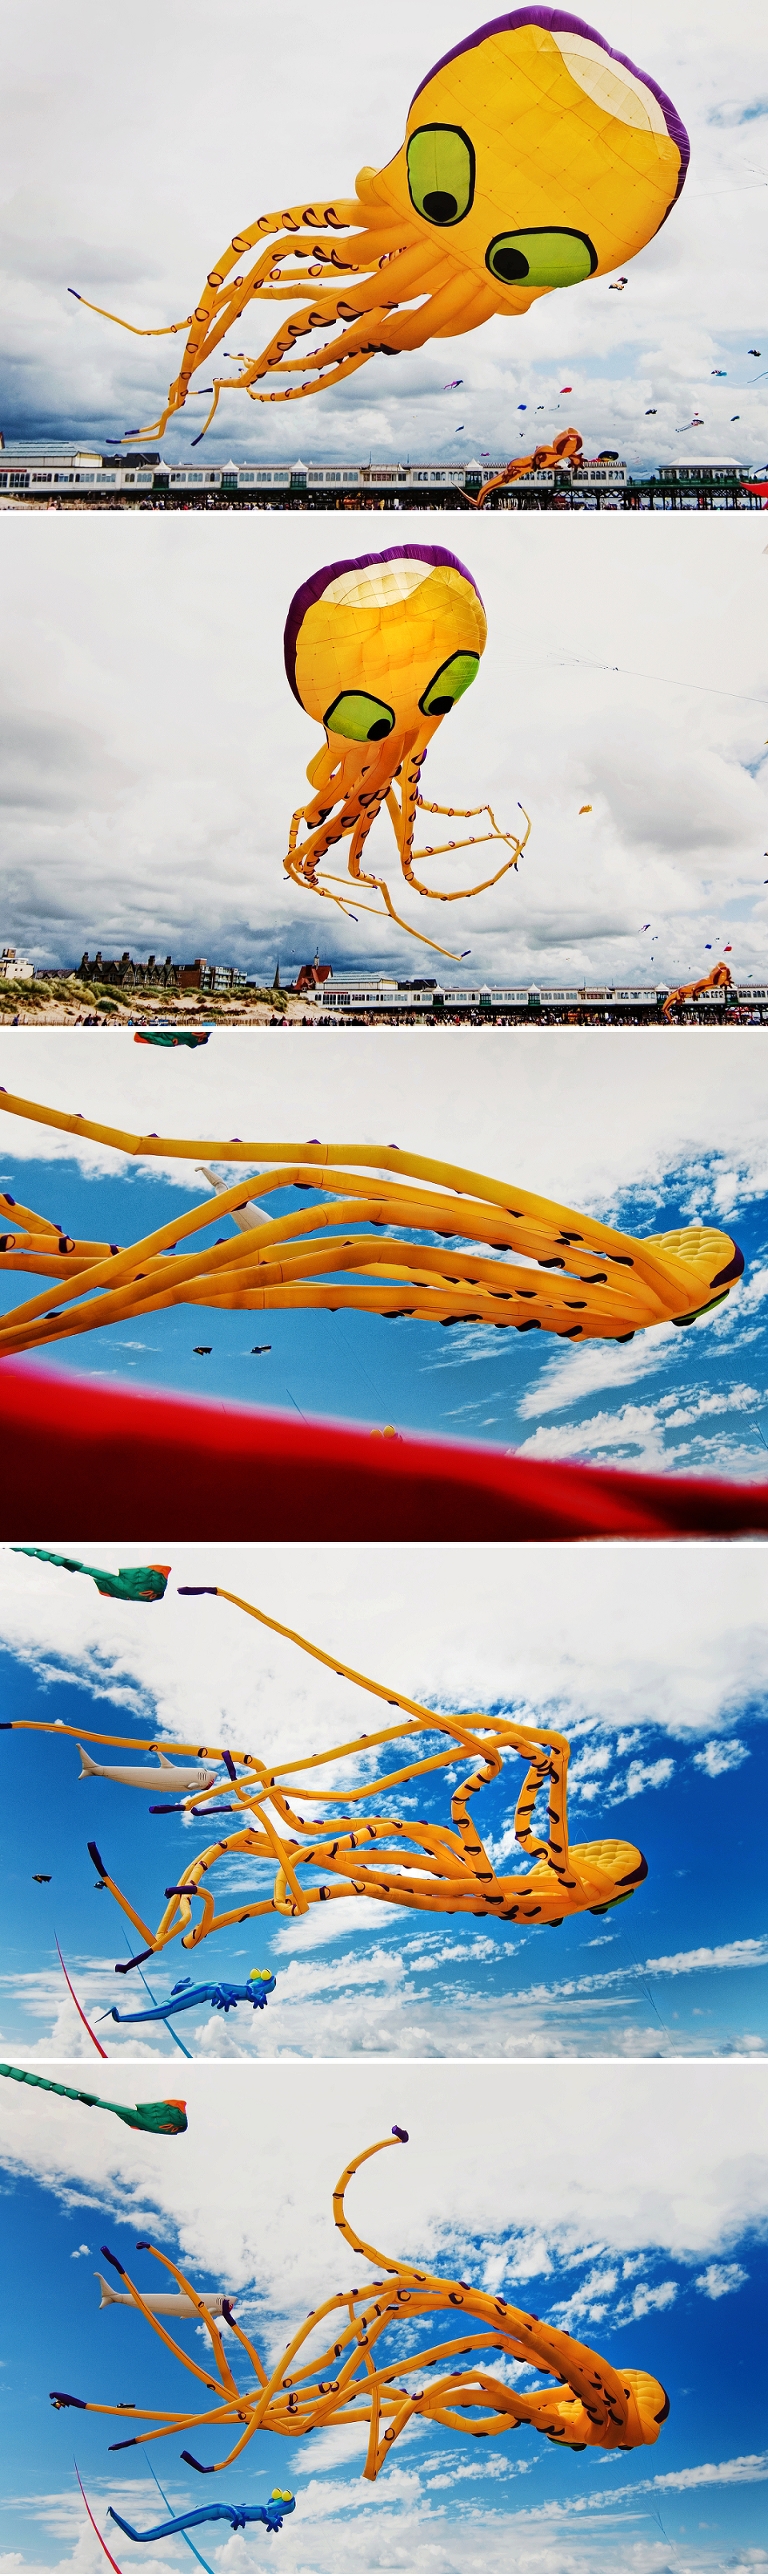 Largest Octopus kite in the world at the kite festival by Smile Factor 10 in Lytham St Annes, Lancashire